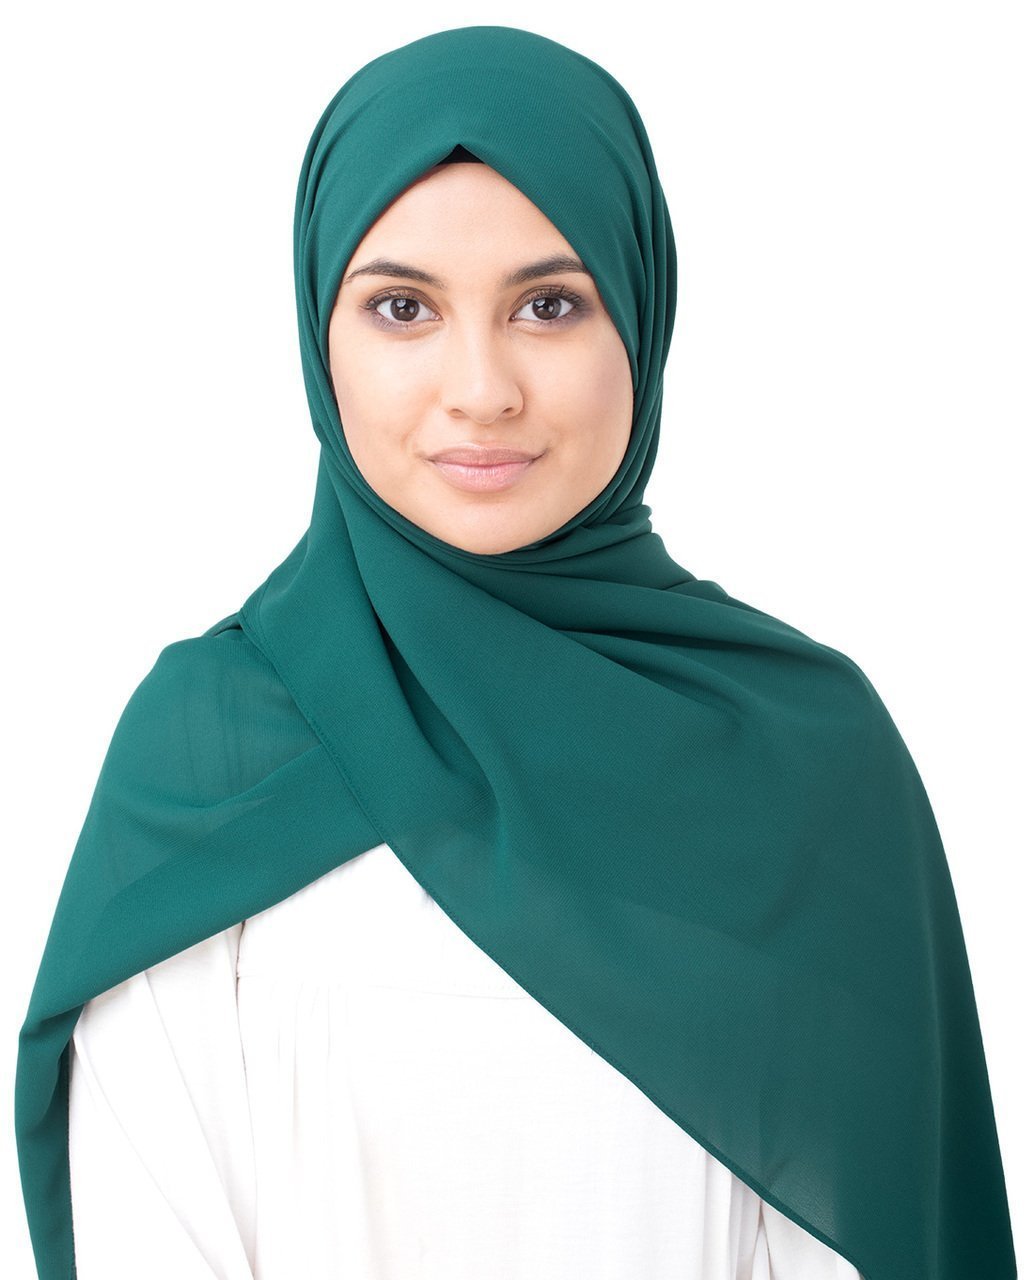 Shop for Georgette Hijab Scarf in June Bug Green Poly - ModestPath.com